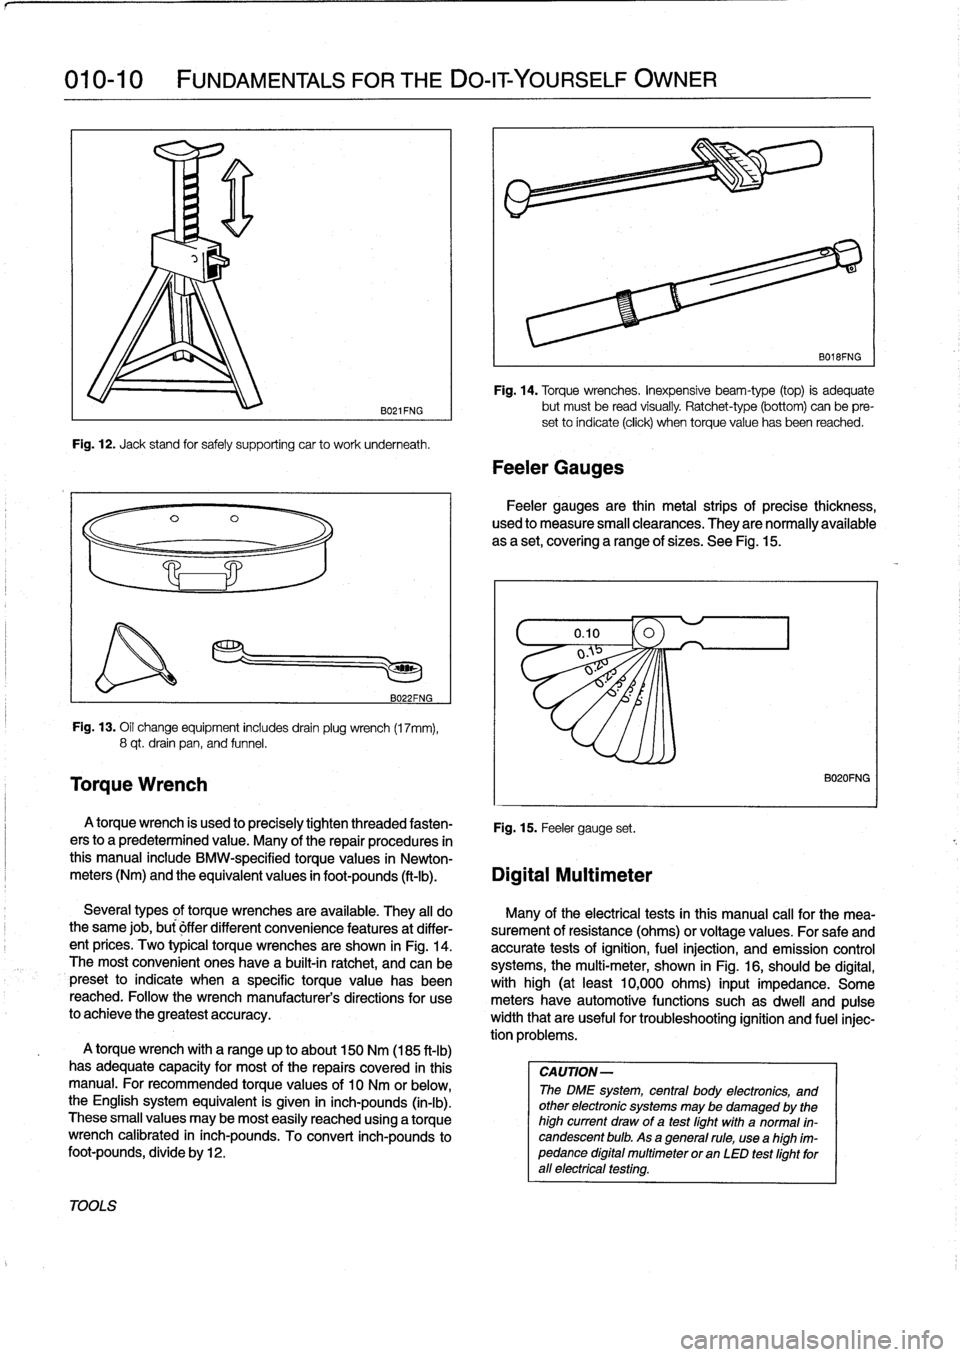 BMW 328i 1998 E36 Workshop Manual 
010-10

	

FUNDAMENTALS
FOR
THE
DO-IT
YOURSELF
OWNER

TOOLS

Torque
Wrench

B021FNG

Fig
.
12
.
Jack
stand
for
safely
supporting
car
to
work
underneath
.

B022FNG

Fig
.
13
.
Oil
change
equipment
inc